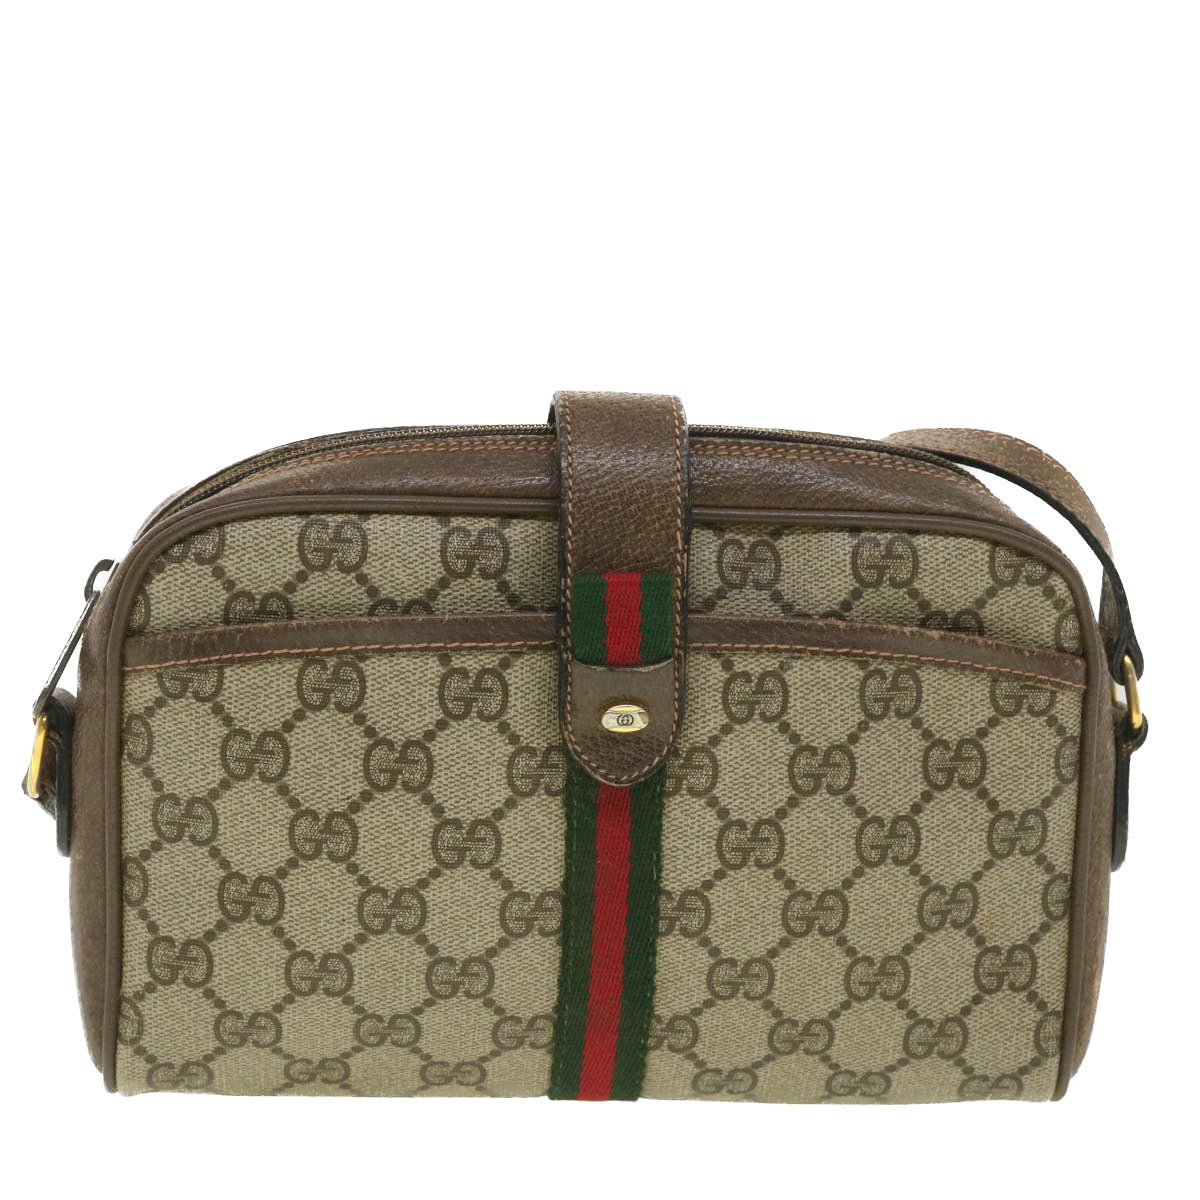 GUCCI GG Canvas Web Sherry Line Shoulder Bag Beige Red 89.02.055 Auth 38051